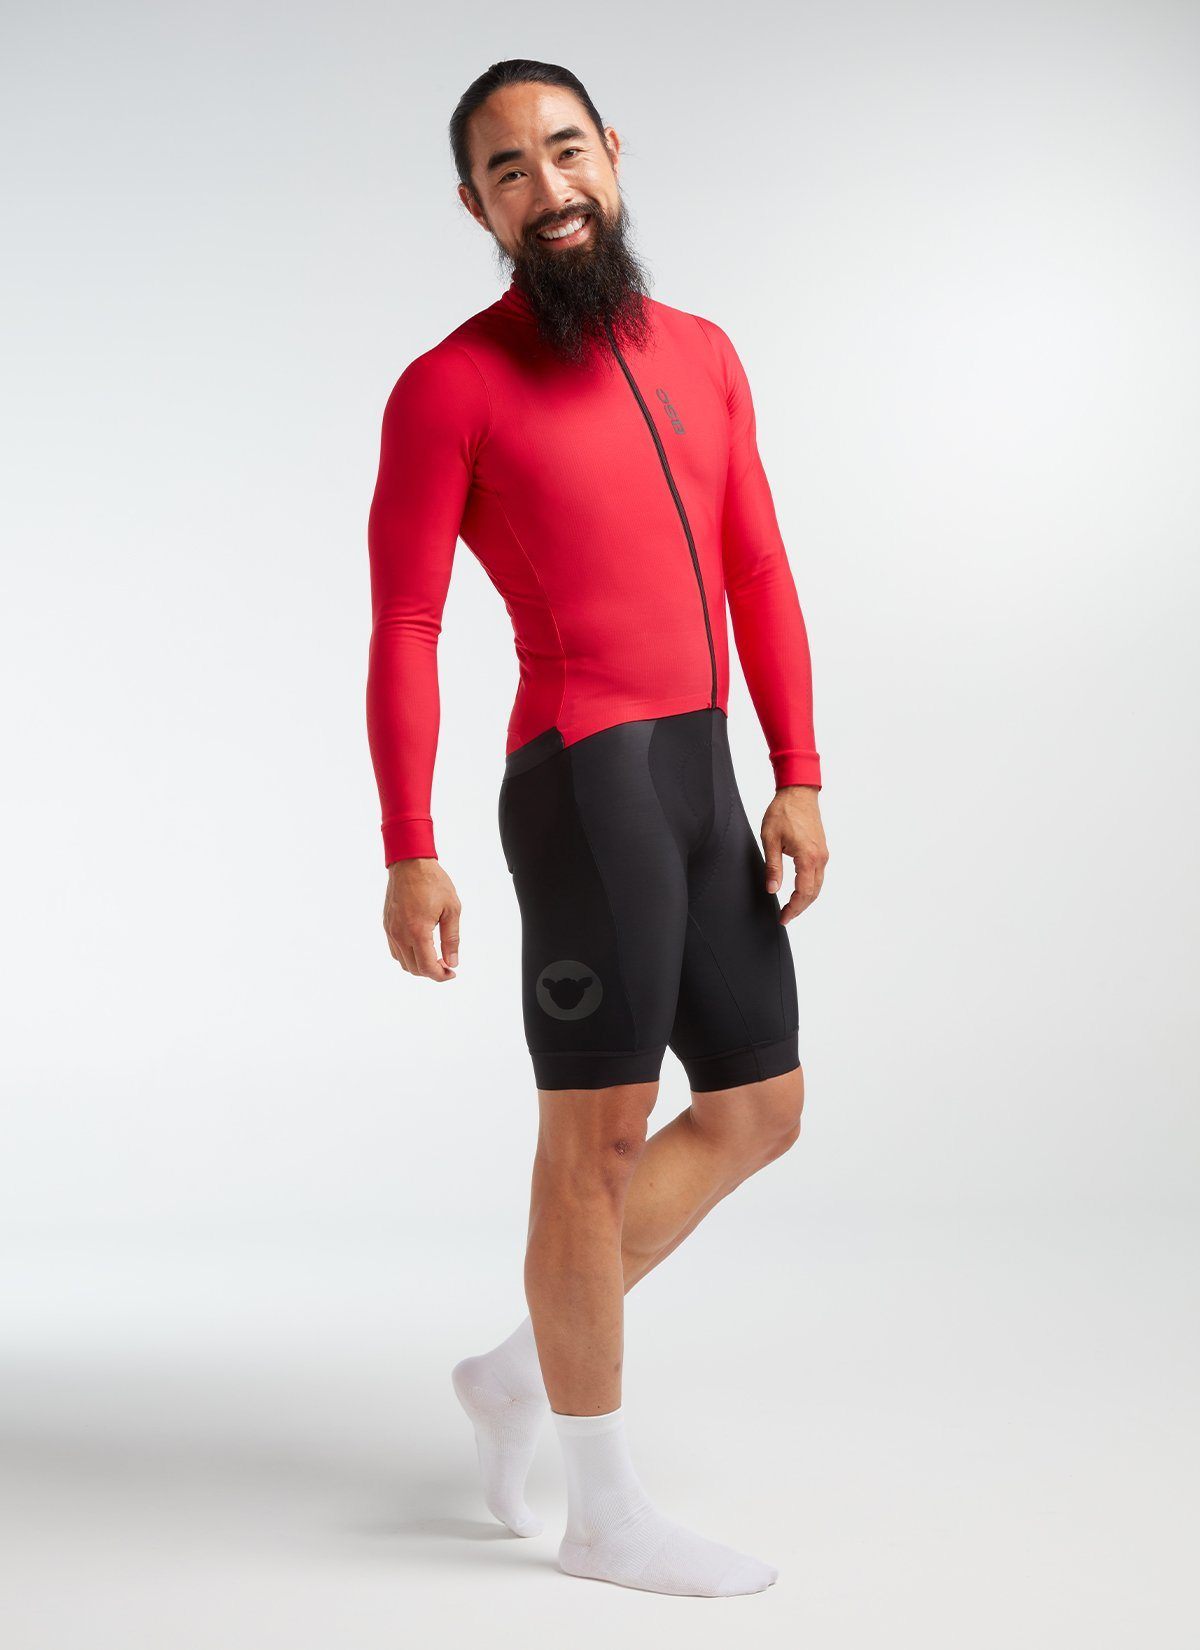 Men's Elements LS Thermal Jersey - Jester Red